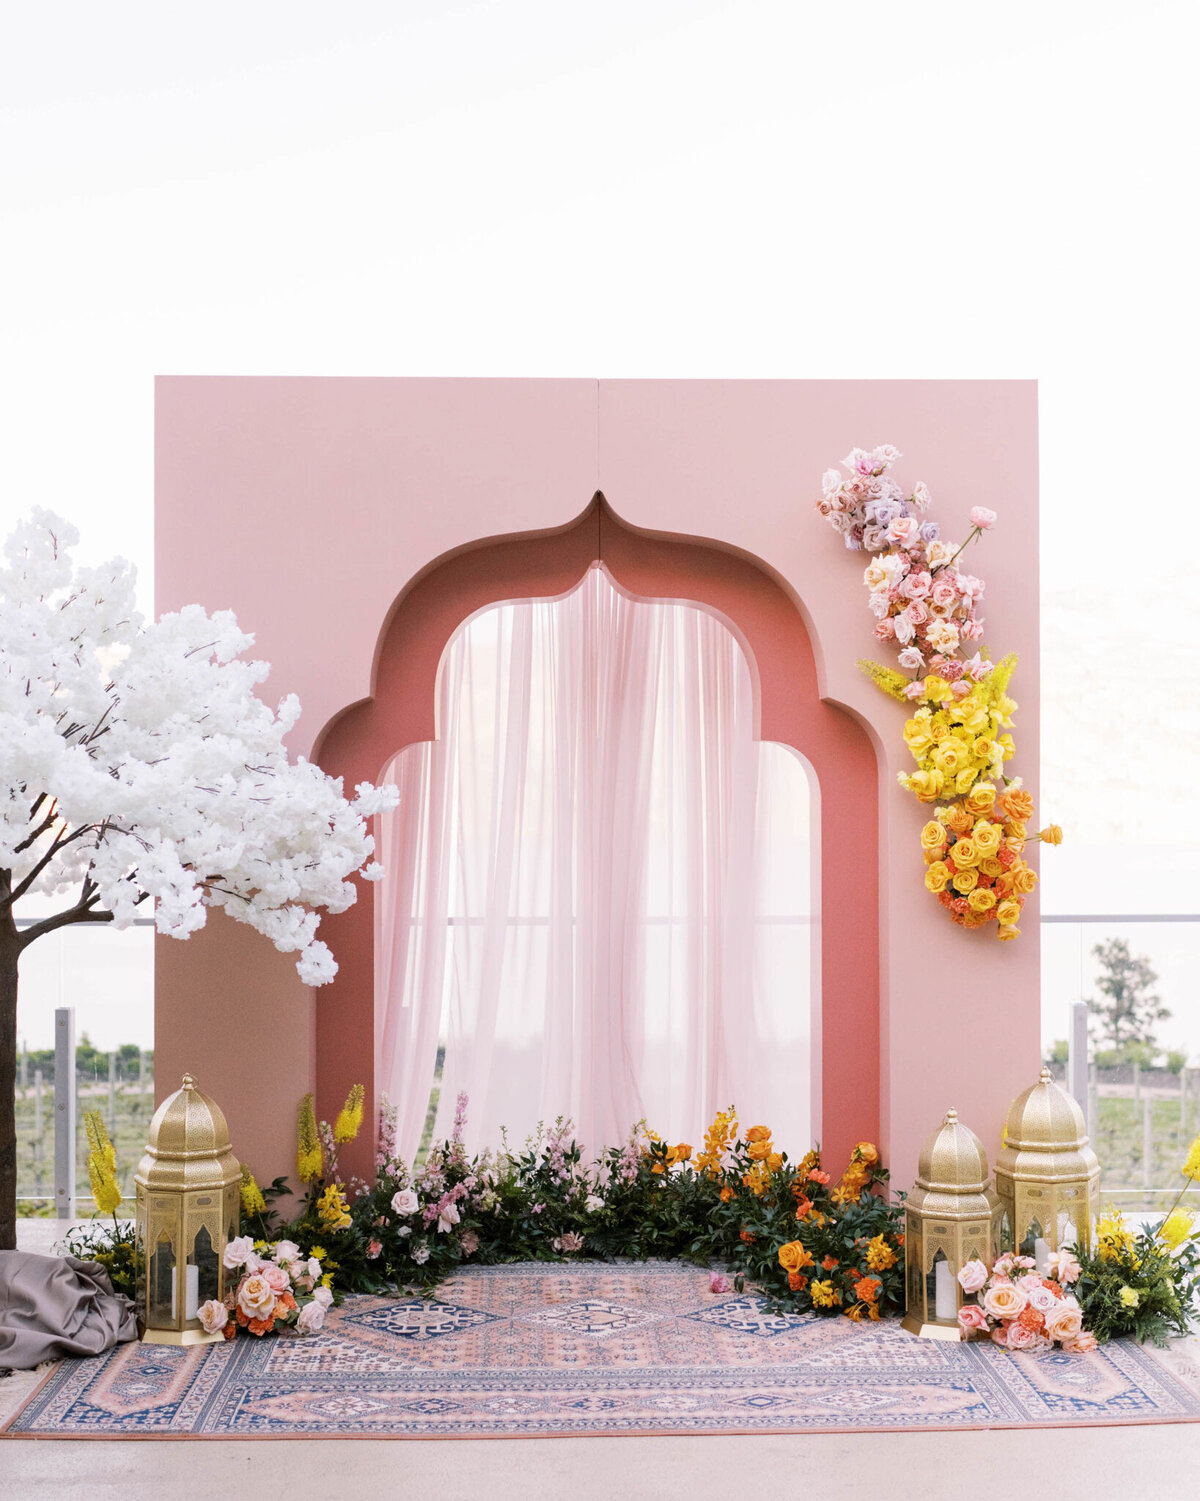 Pink moroccan themed ceremony decor, florals by Valley Bloom Co, bright and airy wedding florals based in Kelowna, BC. Featured on the Brontë Bride Vendor Guide.